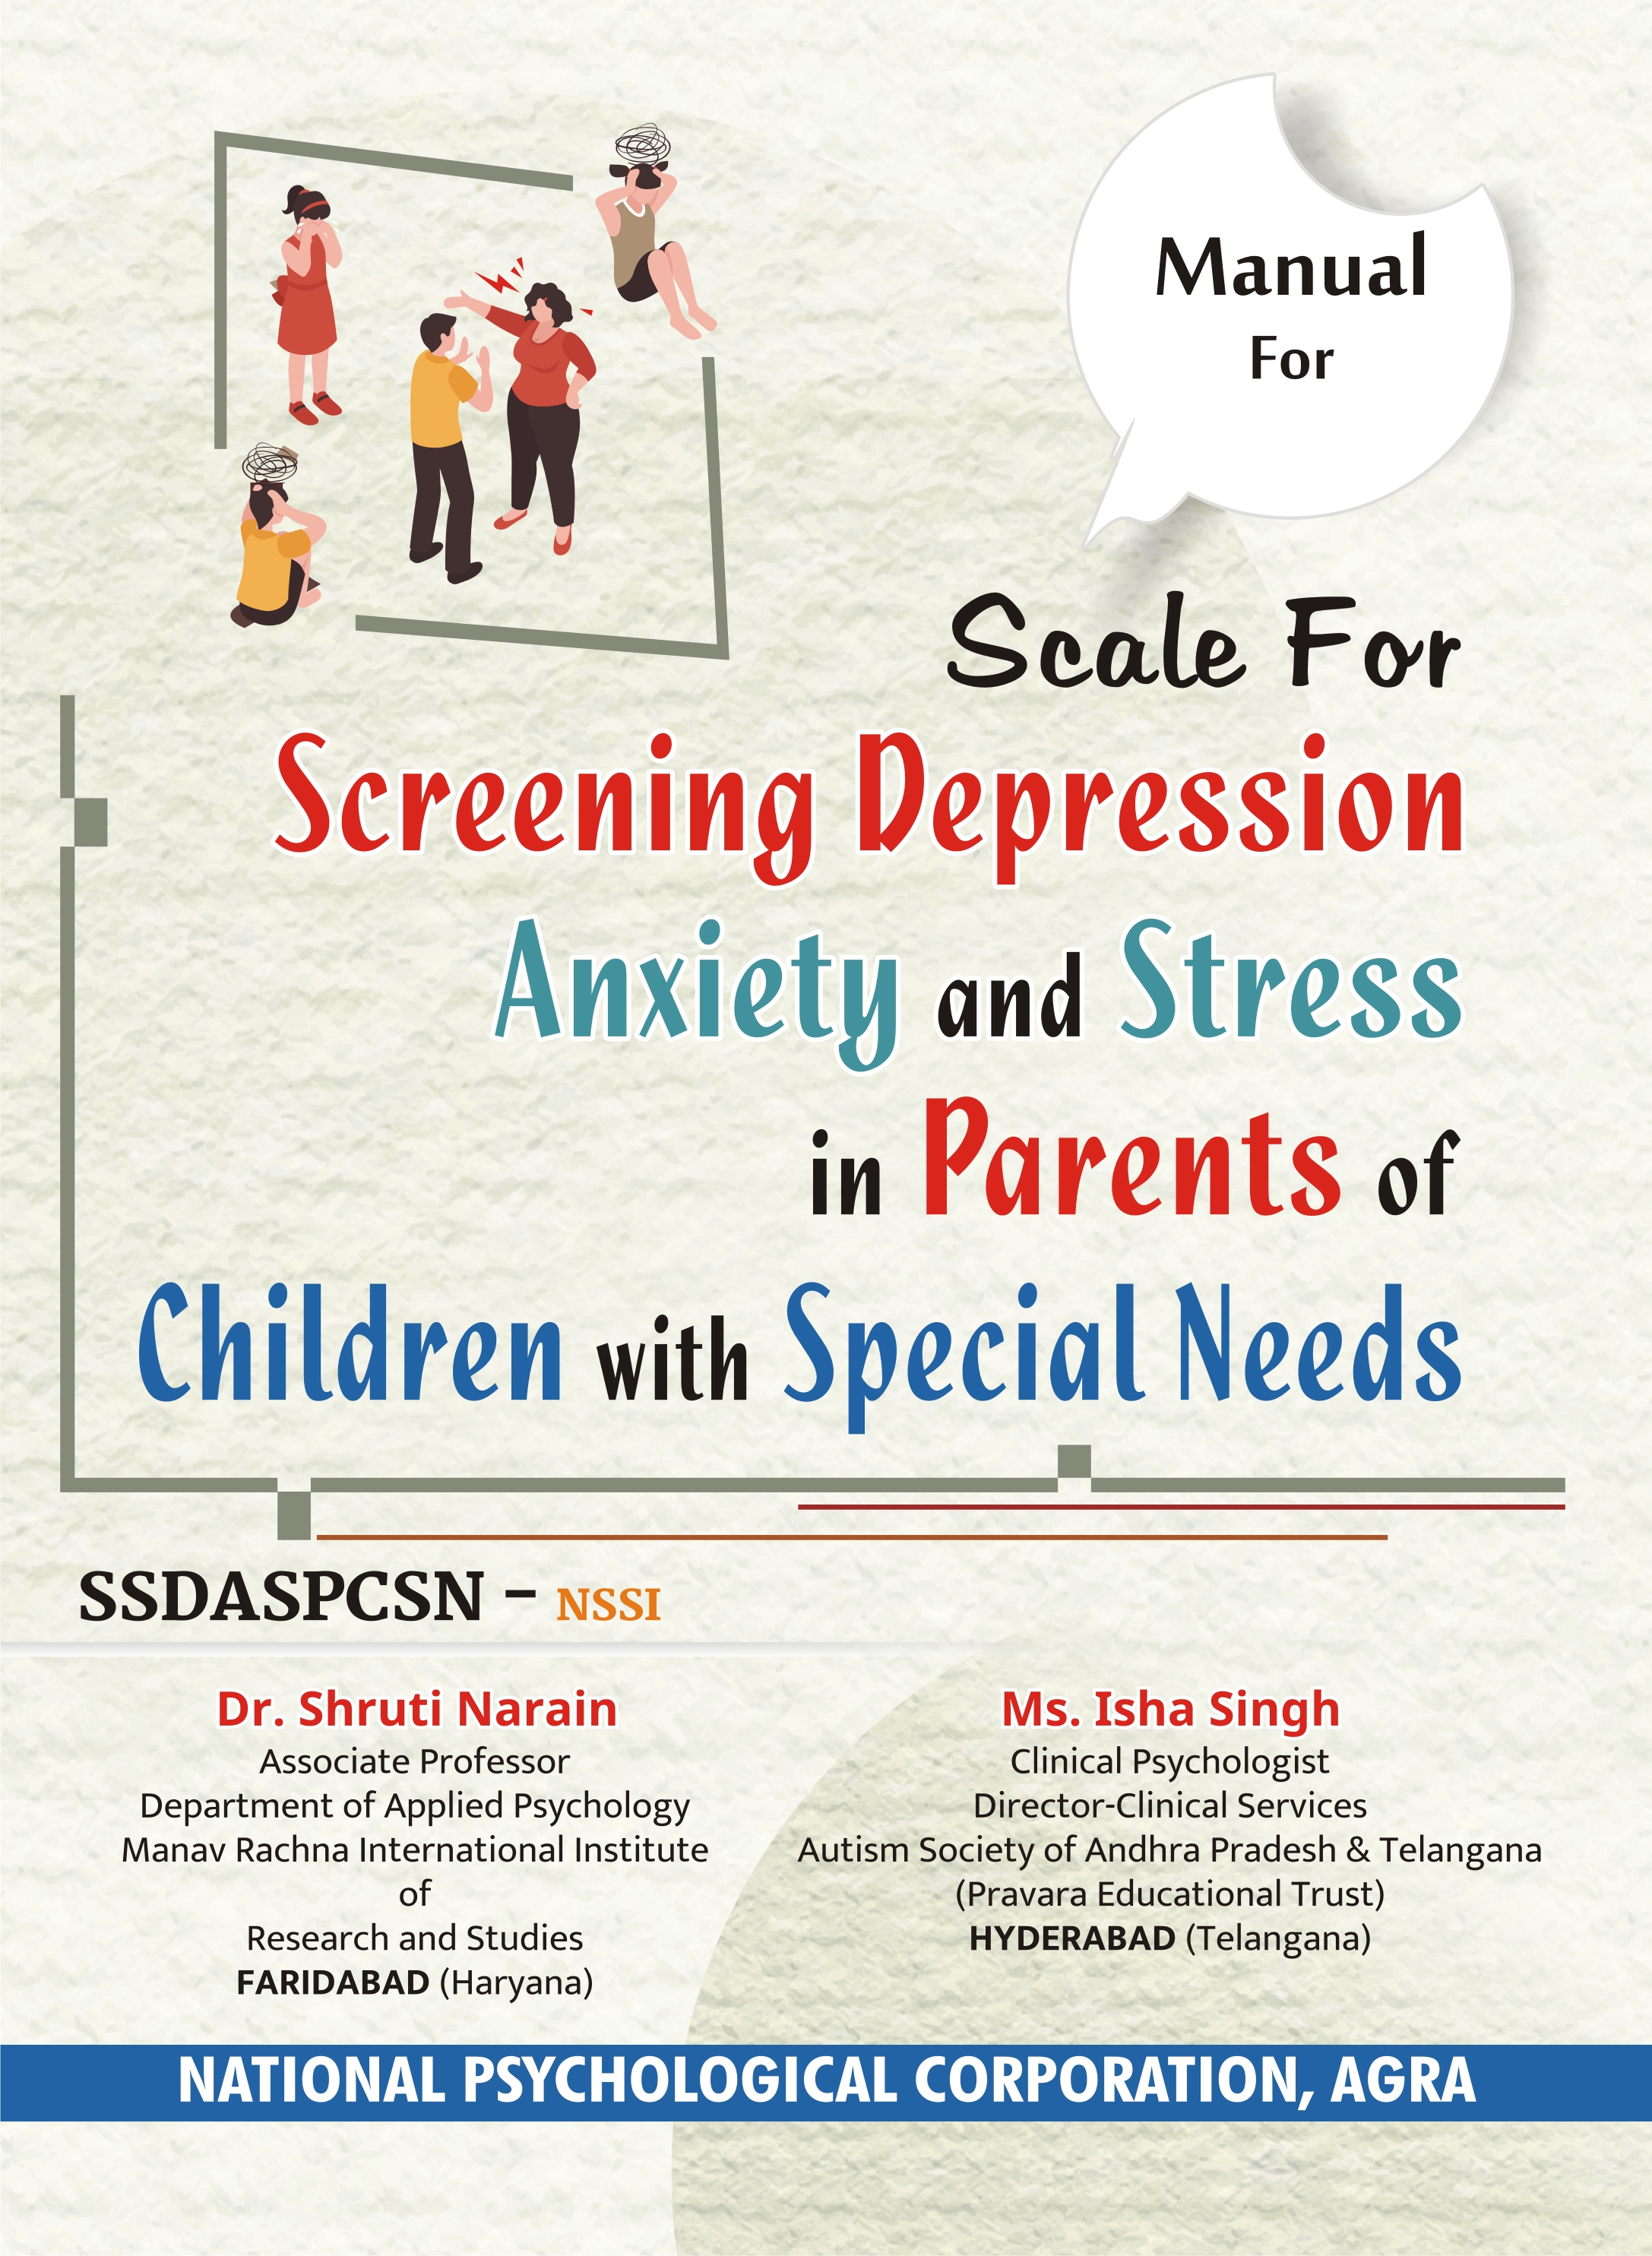 Scale-for-Screening-Depression-Anxiety-and-Stress-in-Parents-of-Children-with-Special-Needs